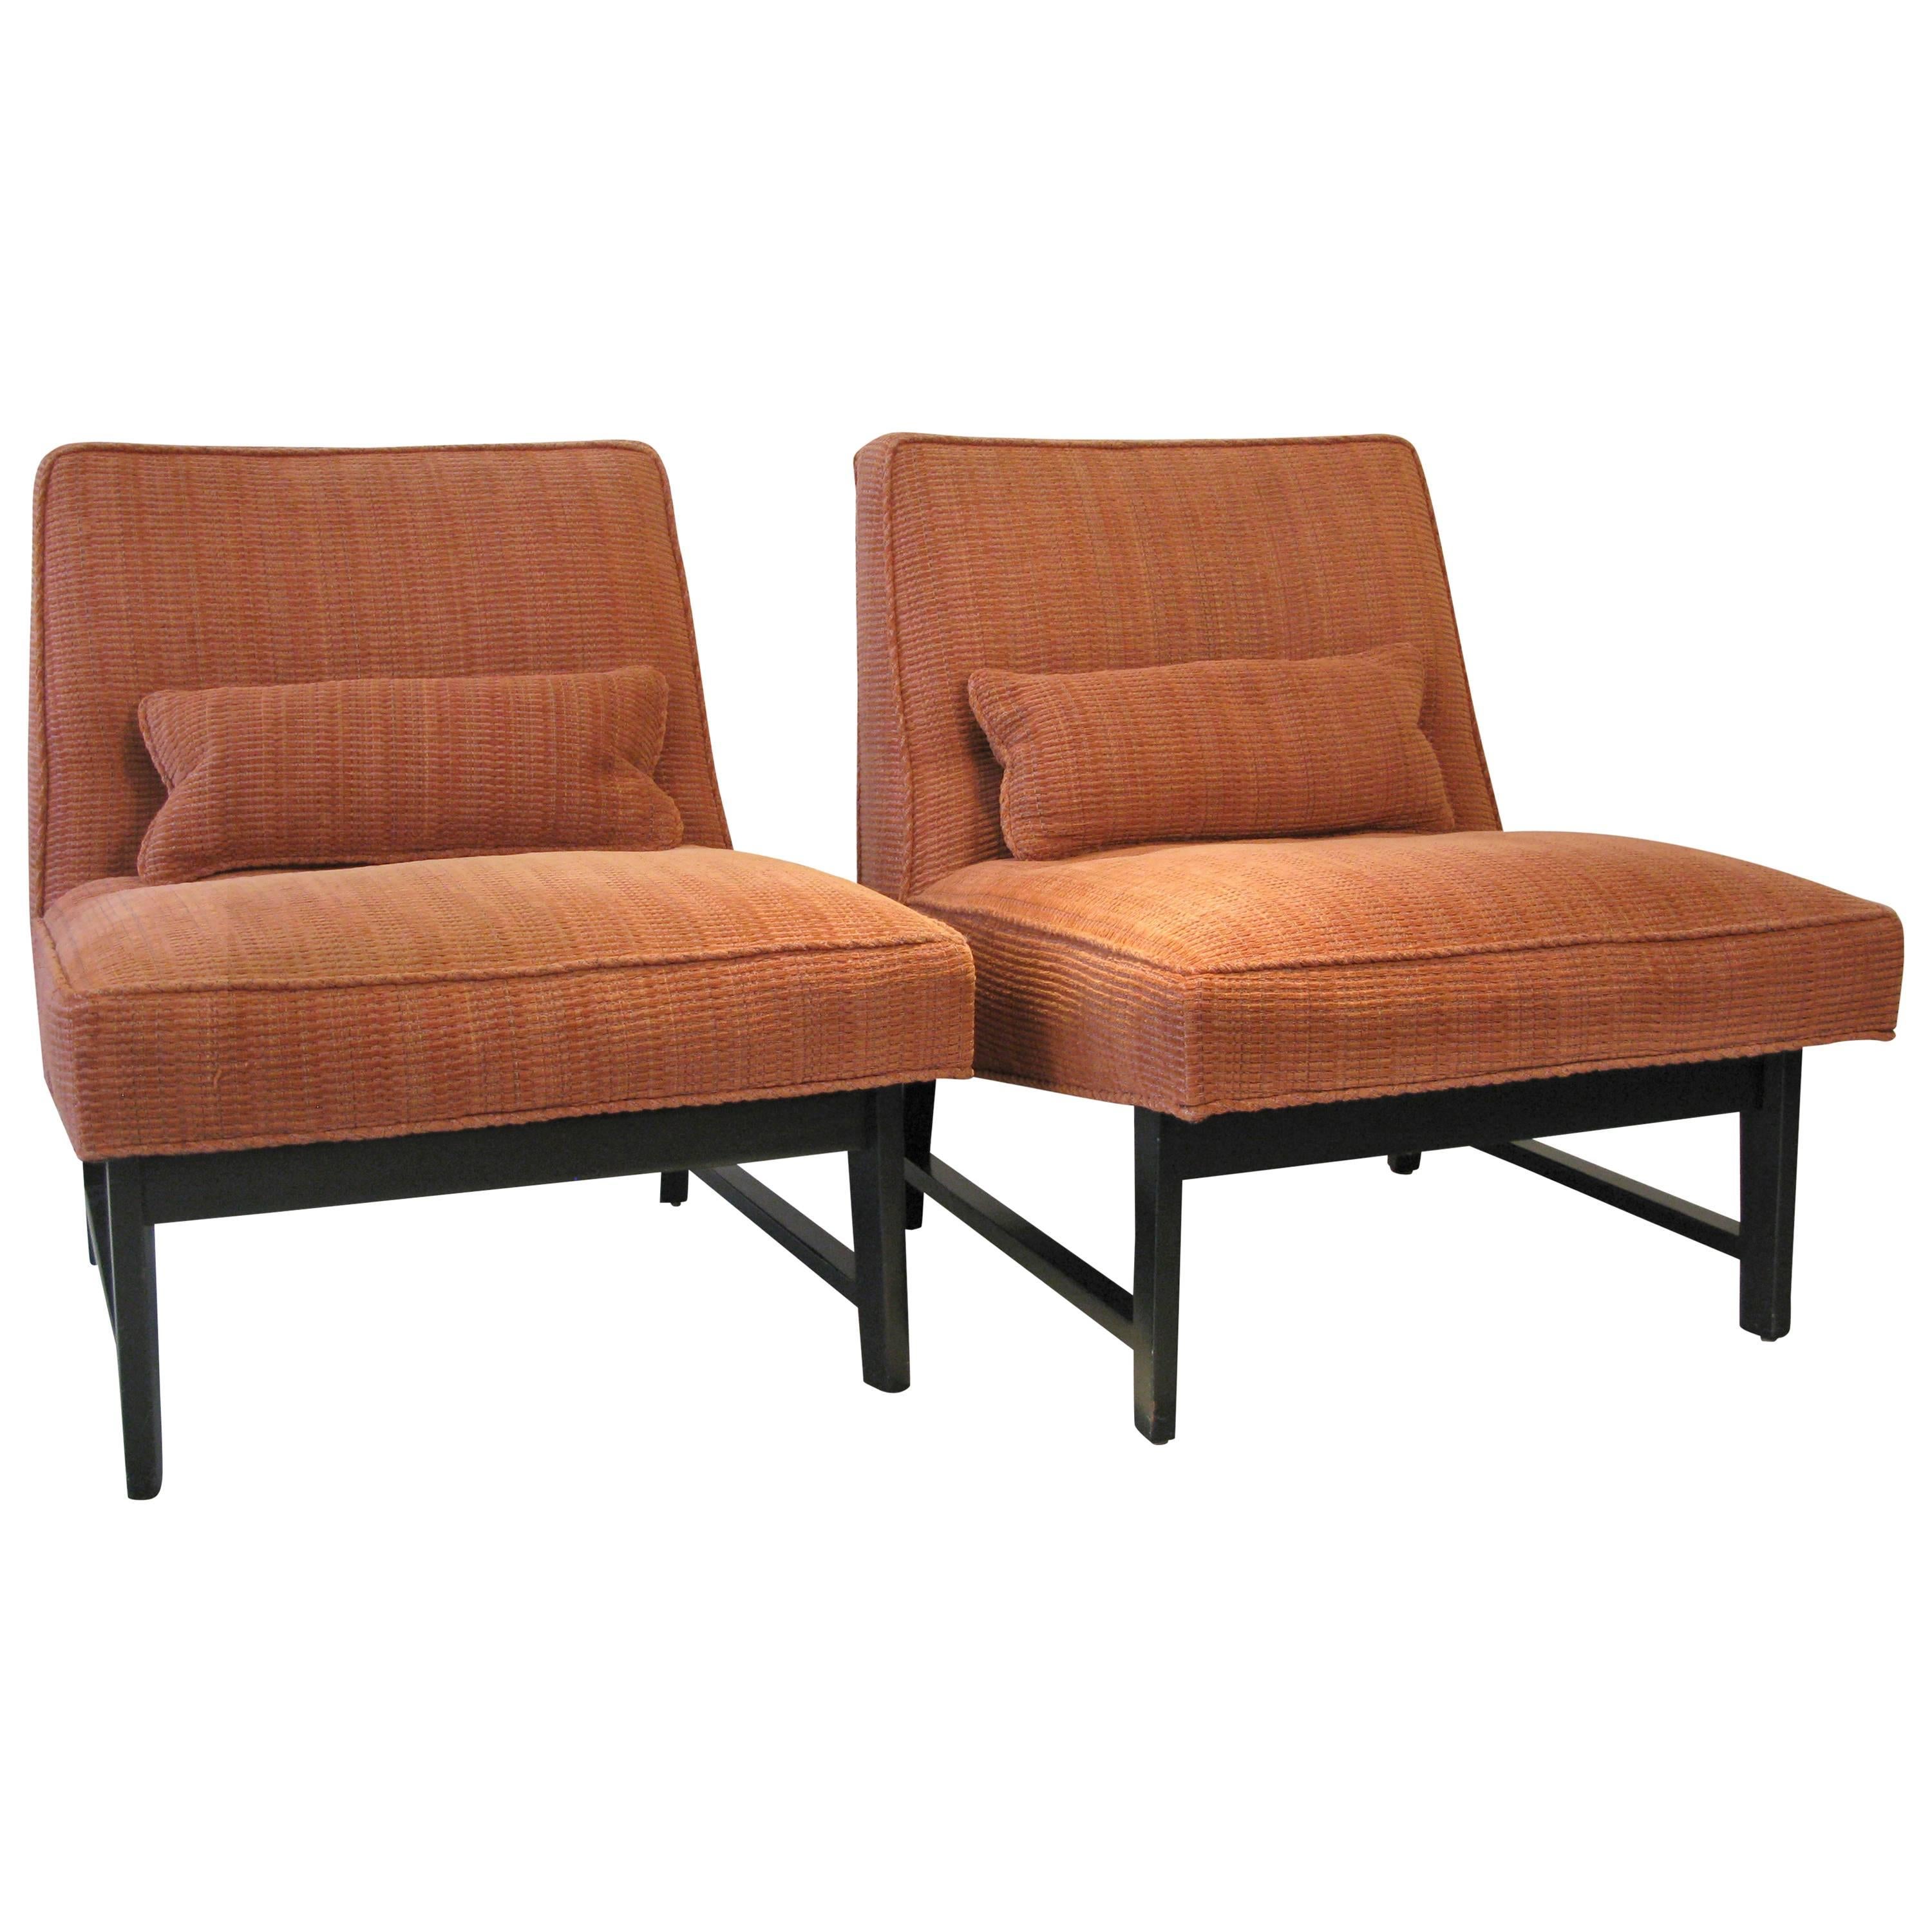 Pair of Dunbar Lounge or Slipper Chairs by Edward Wormley